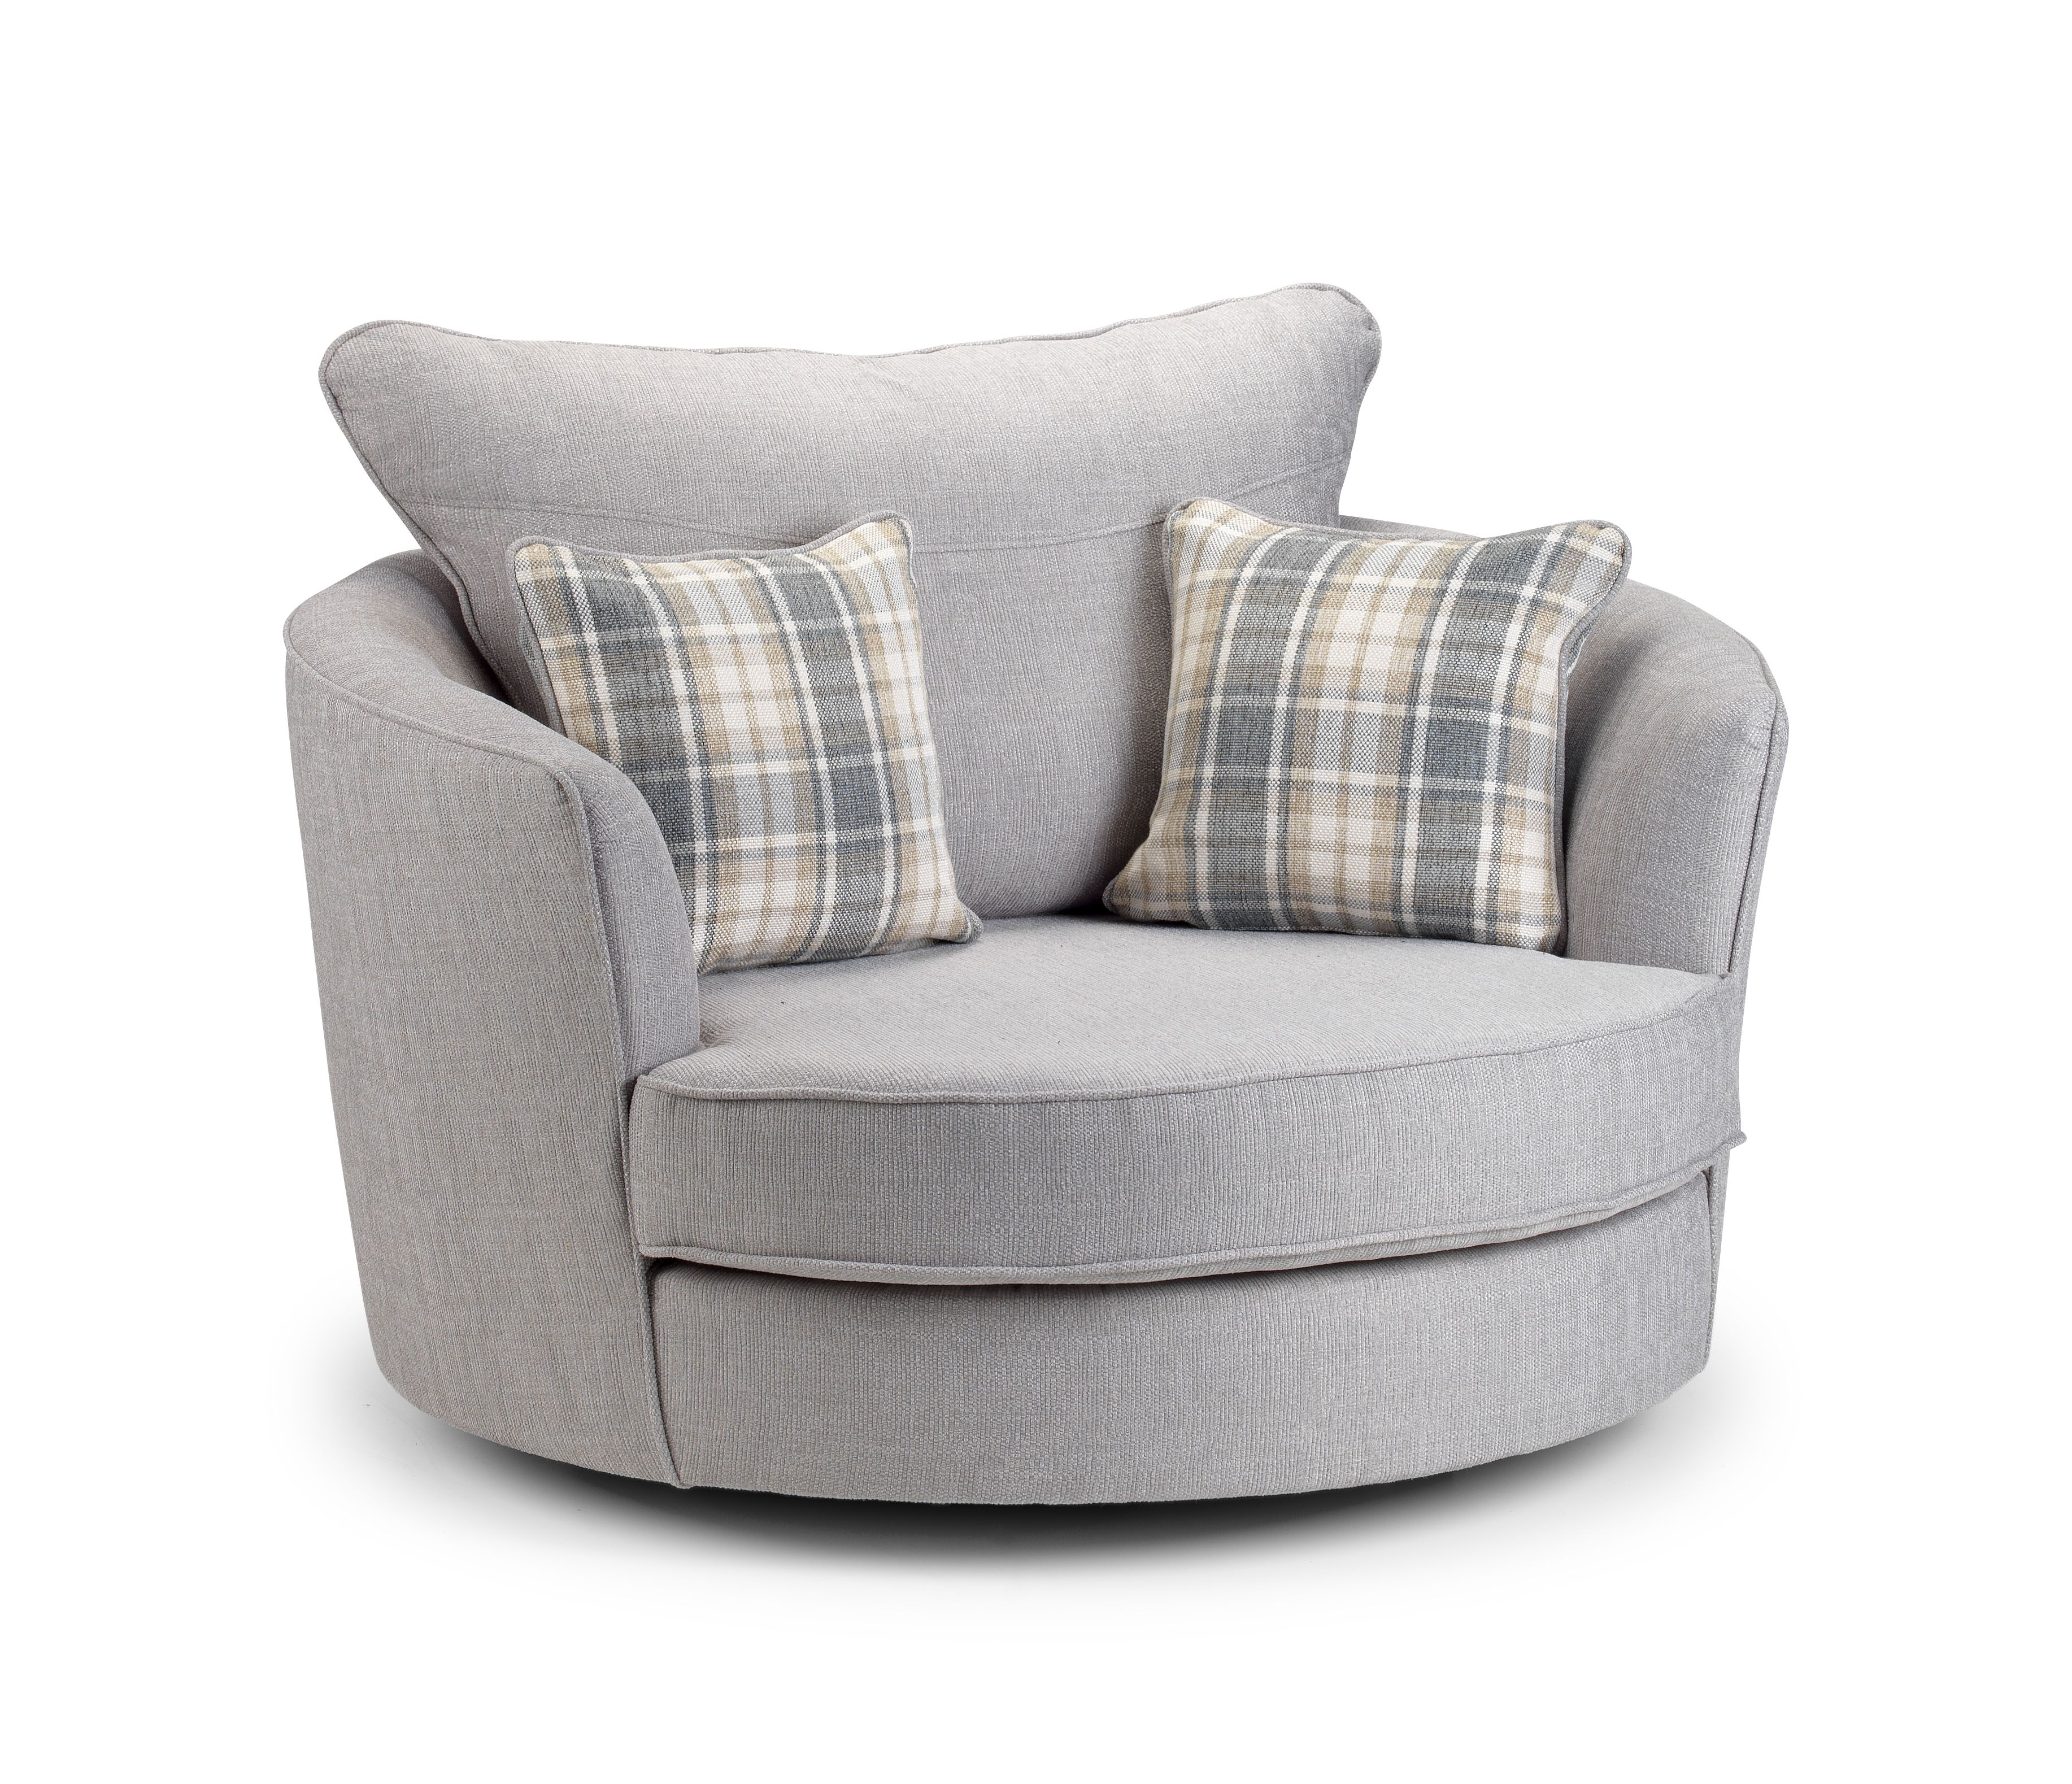 Awesome Round Swivel Sofa Chair Gallery Parabellum Throughout Round Sofa Chairs (Photo 3 of 15)